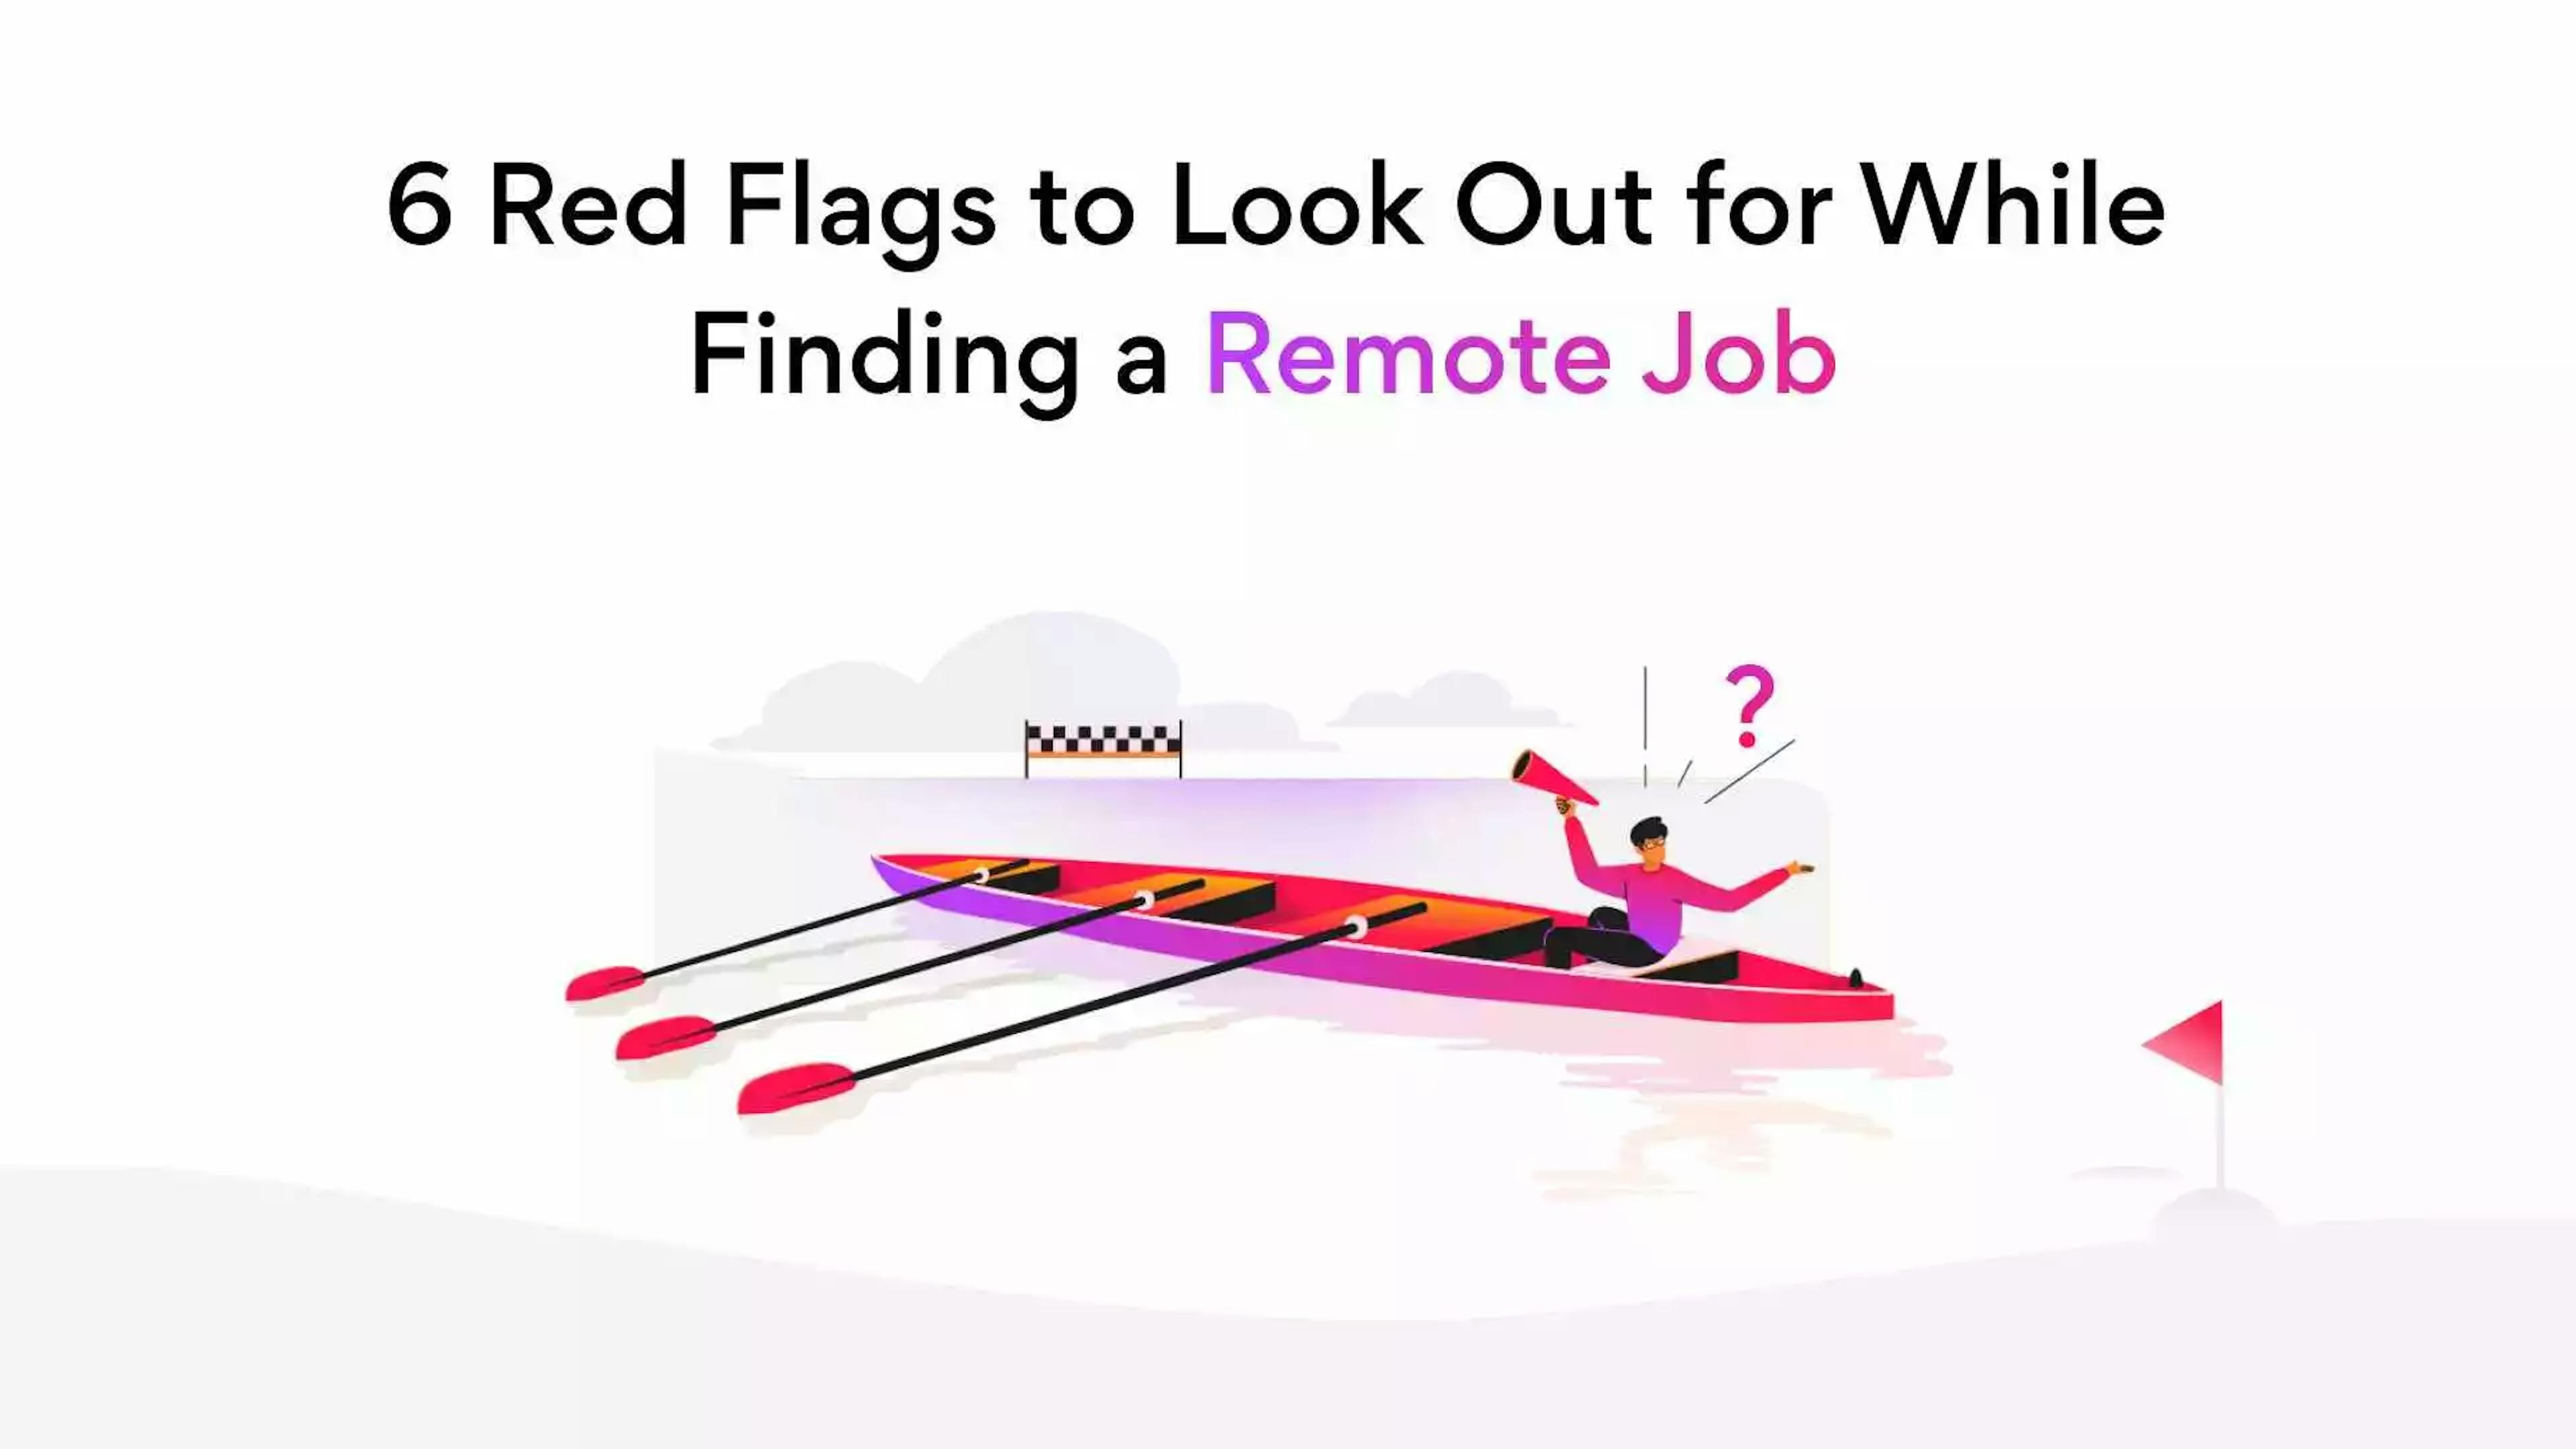 Watch Out for These 6 Red Flags When Looking for Remote Jobs